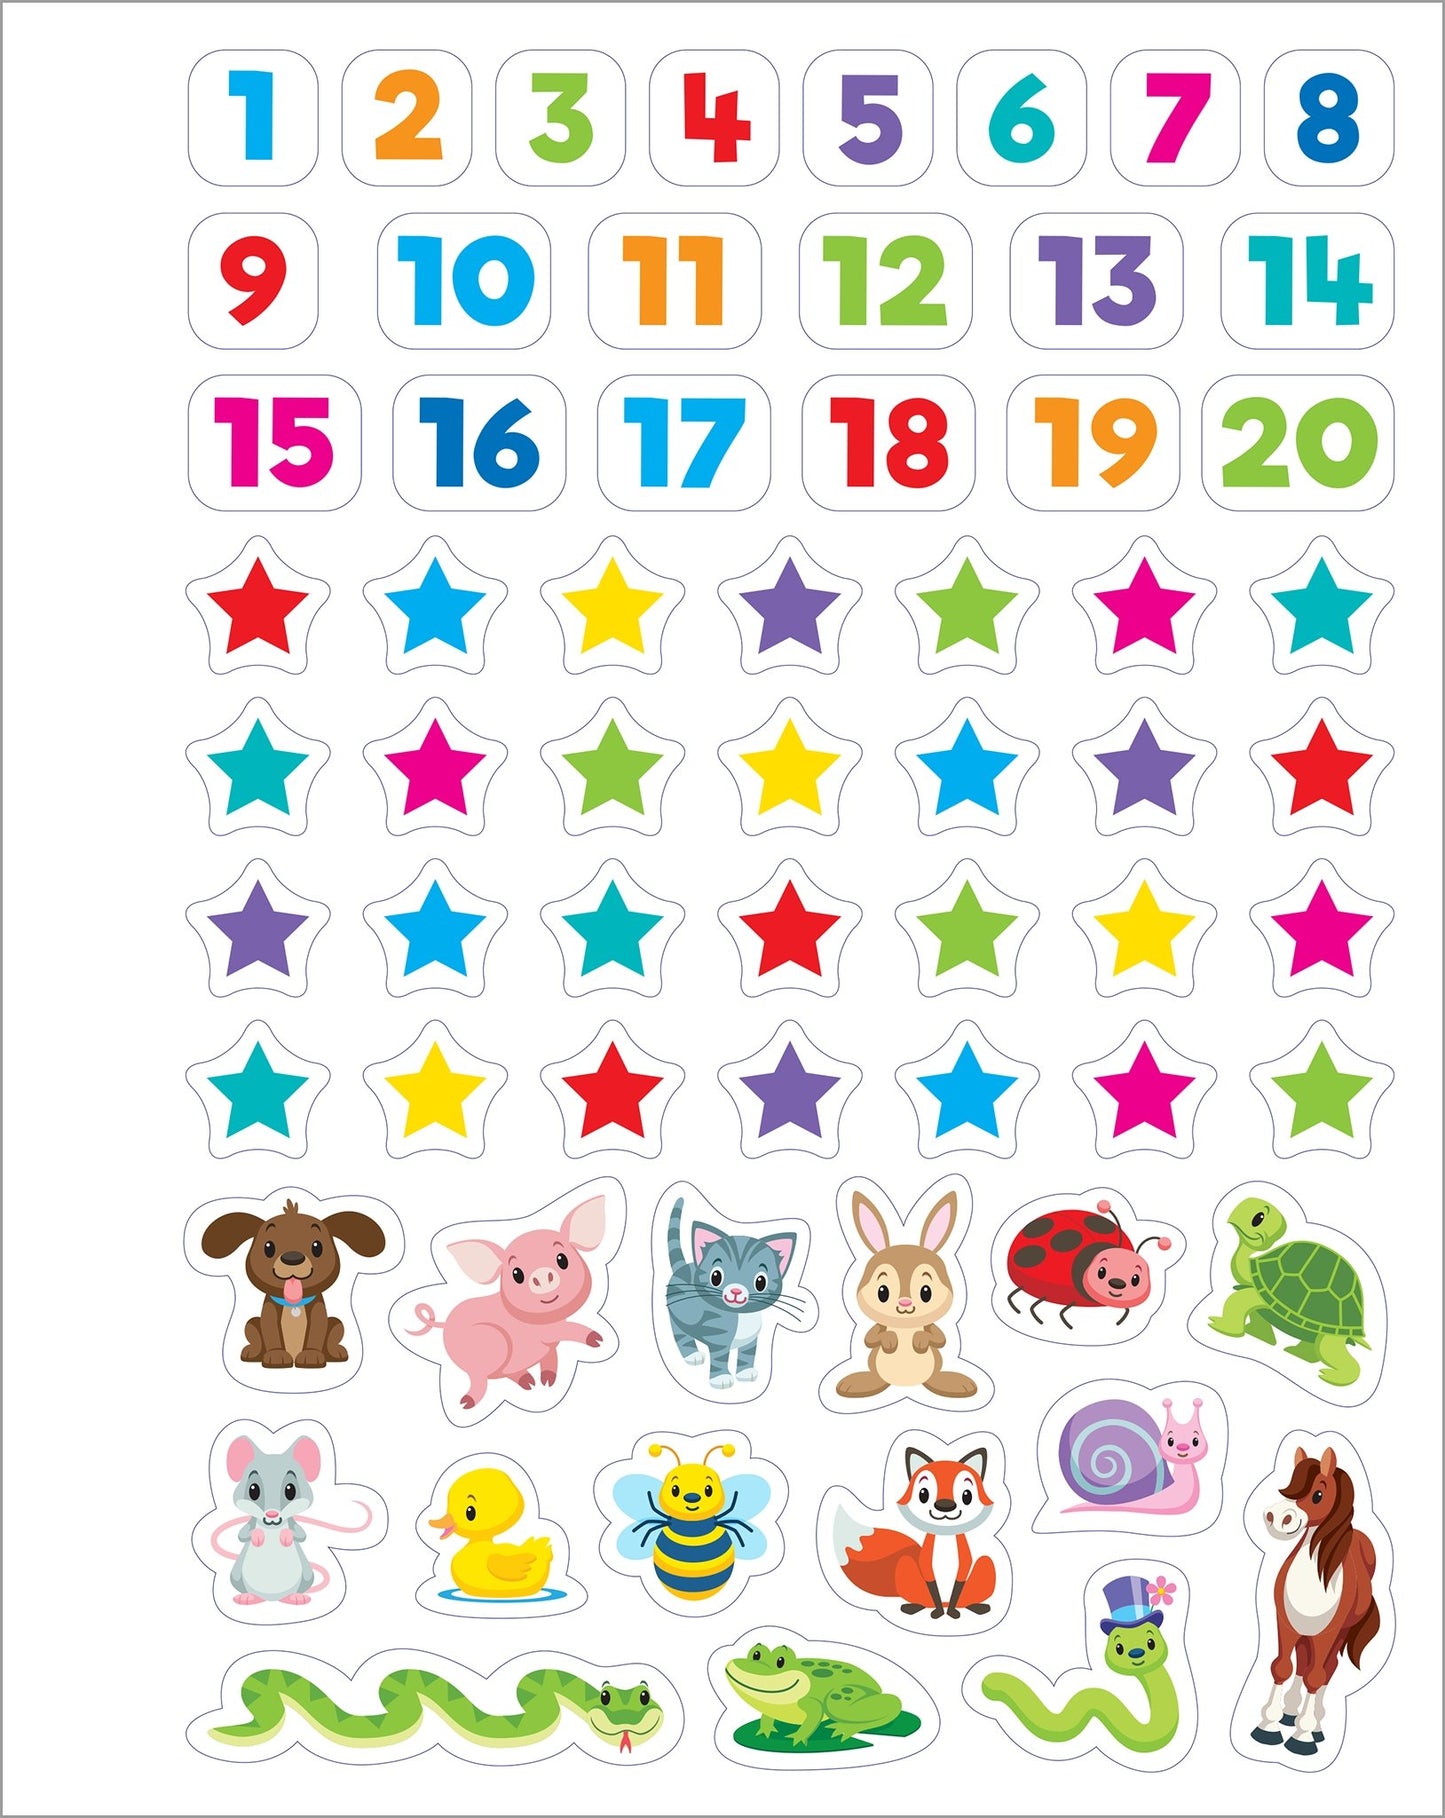 Numbers Writing & Drawing Tablet Workbook - 96 Pages, Ages 3 to 7, Preschool, Kindergarten, 1st Grade, Numbers 1-20, Tracing, Printing